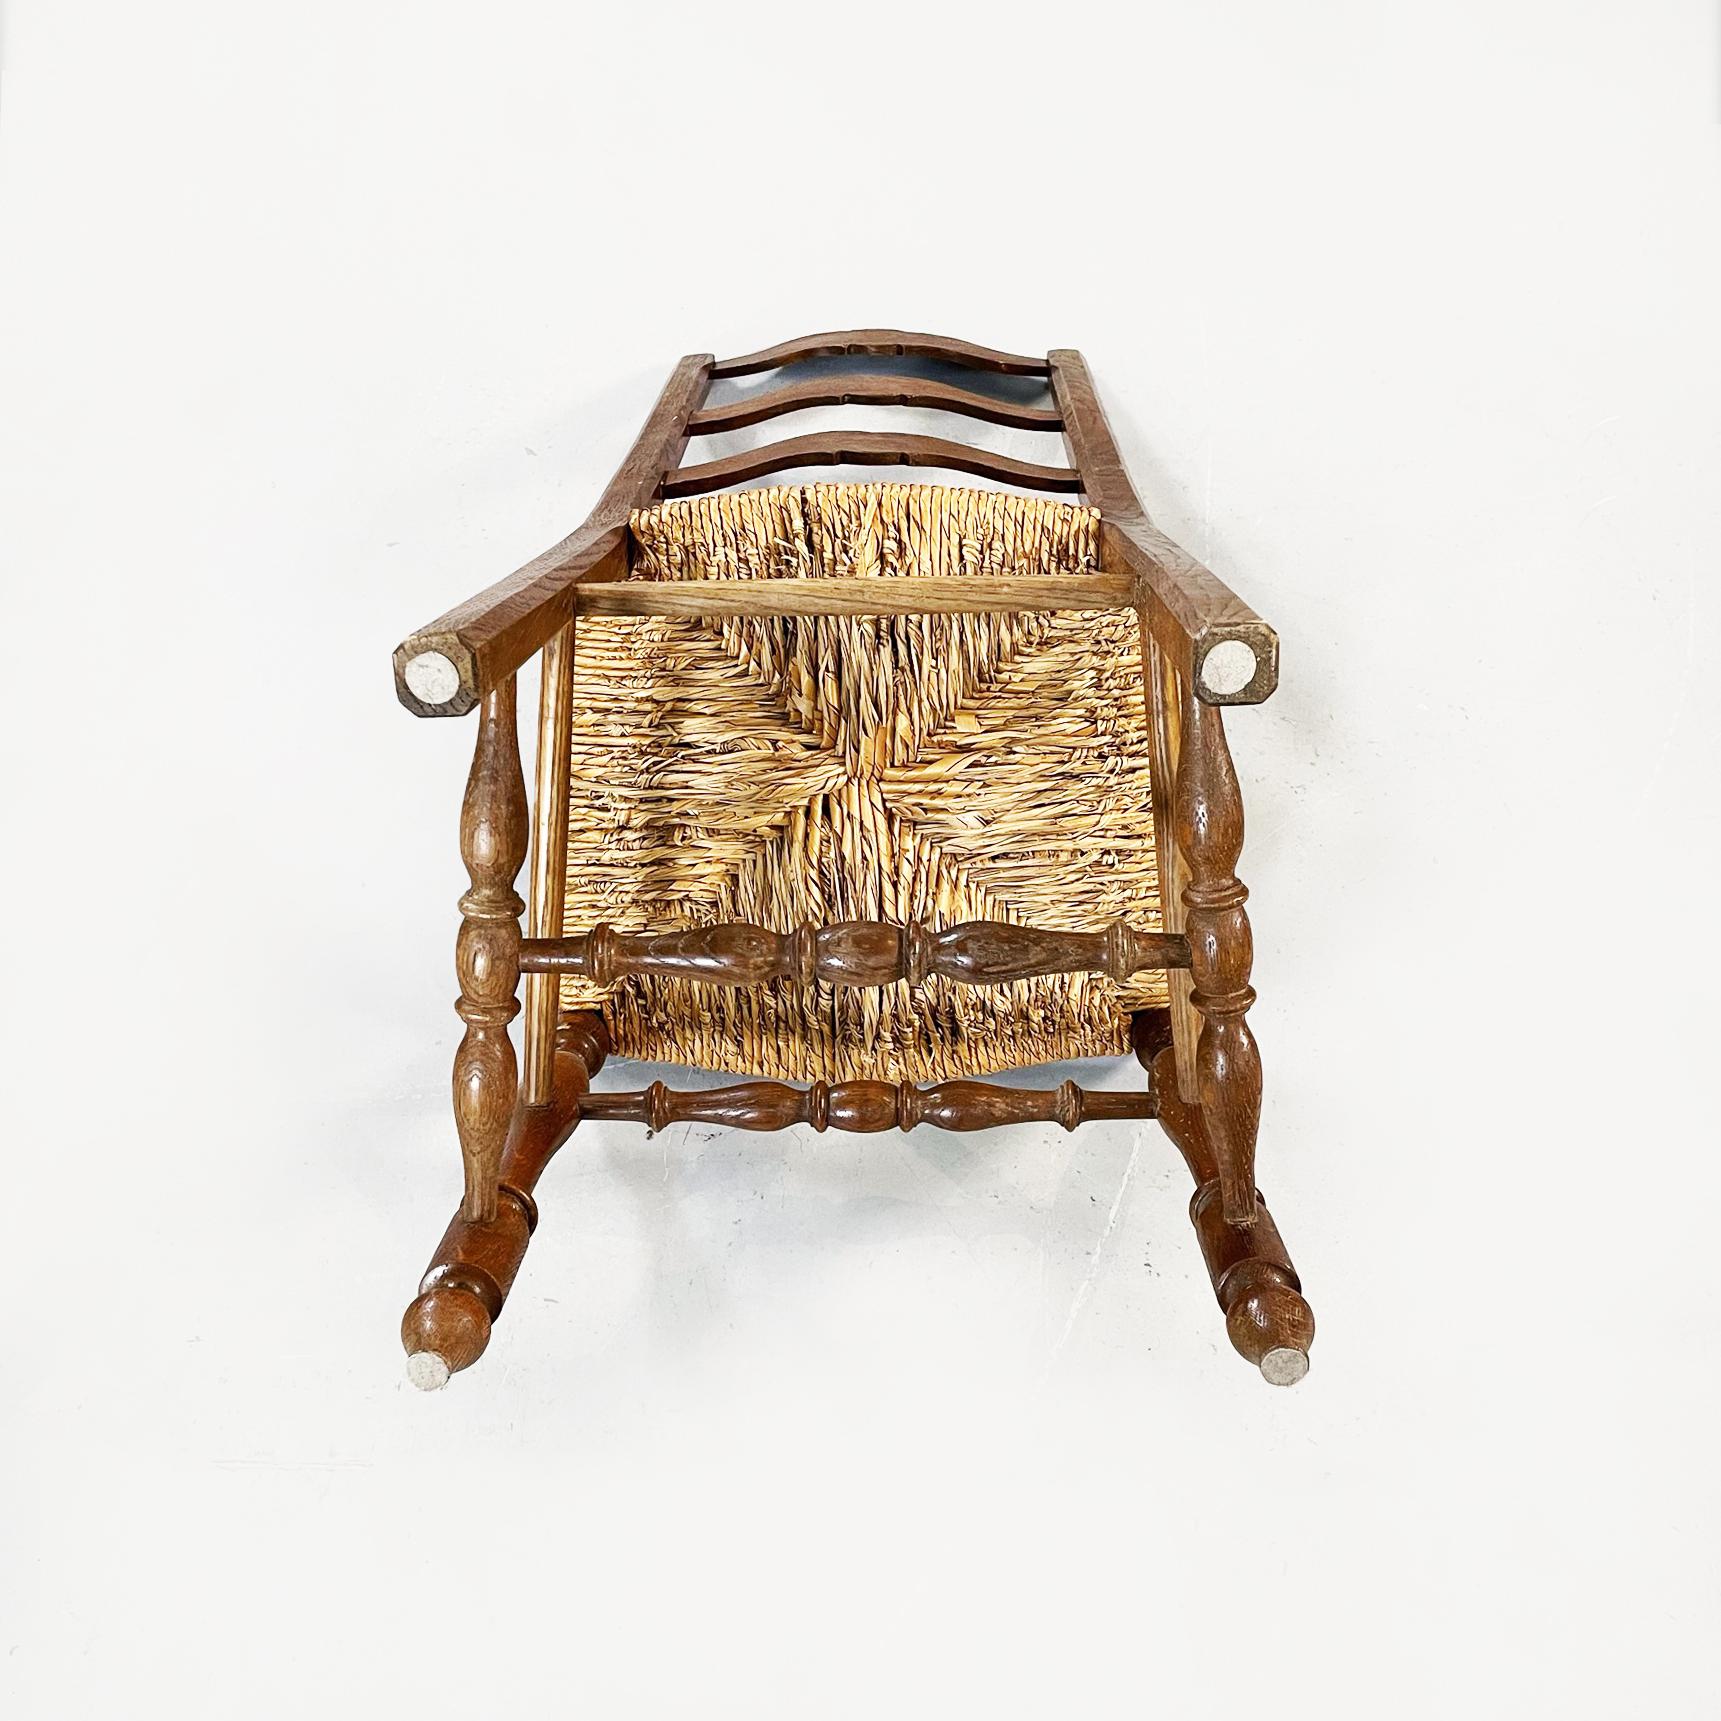 Italian Nineteenth Century Finely Crafted Wooden and Straw Chairs, Late1800s For Sale 13